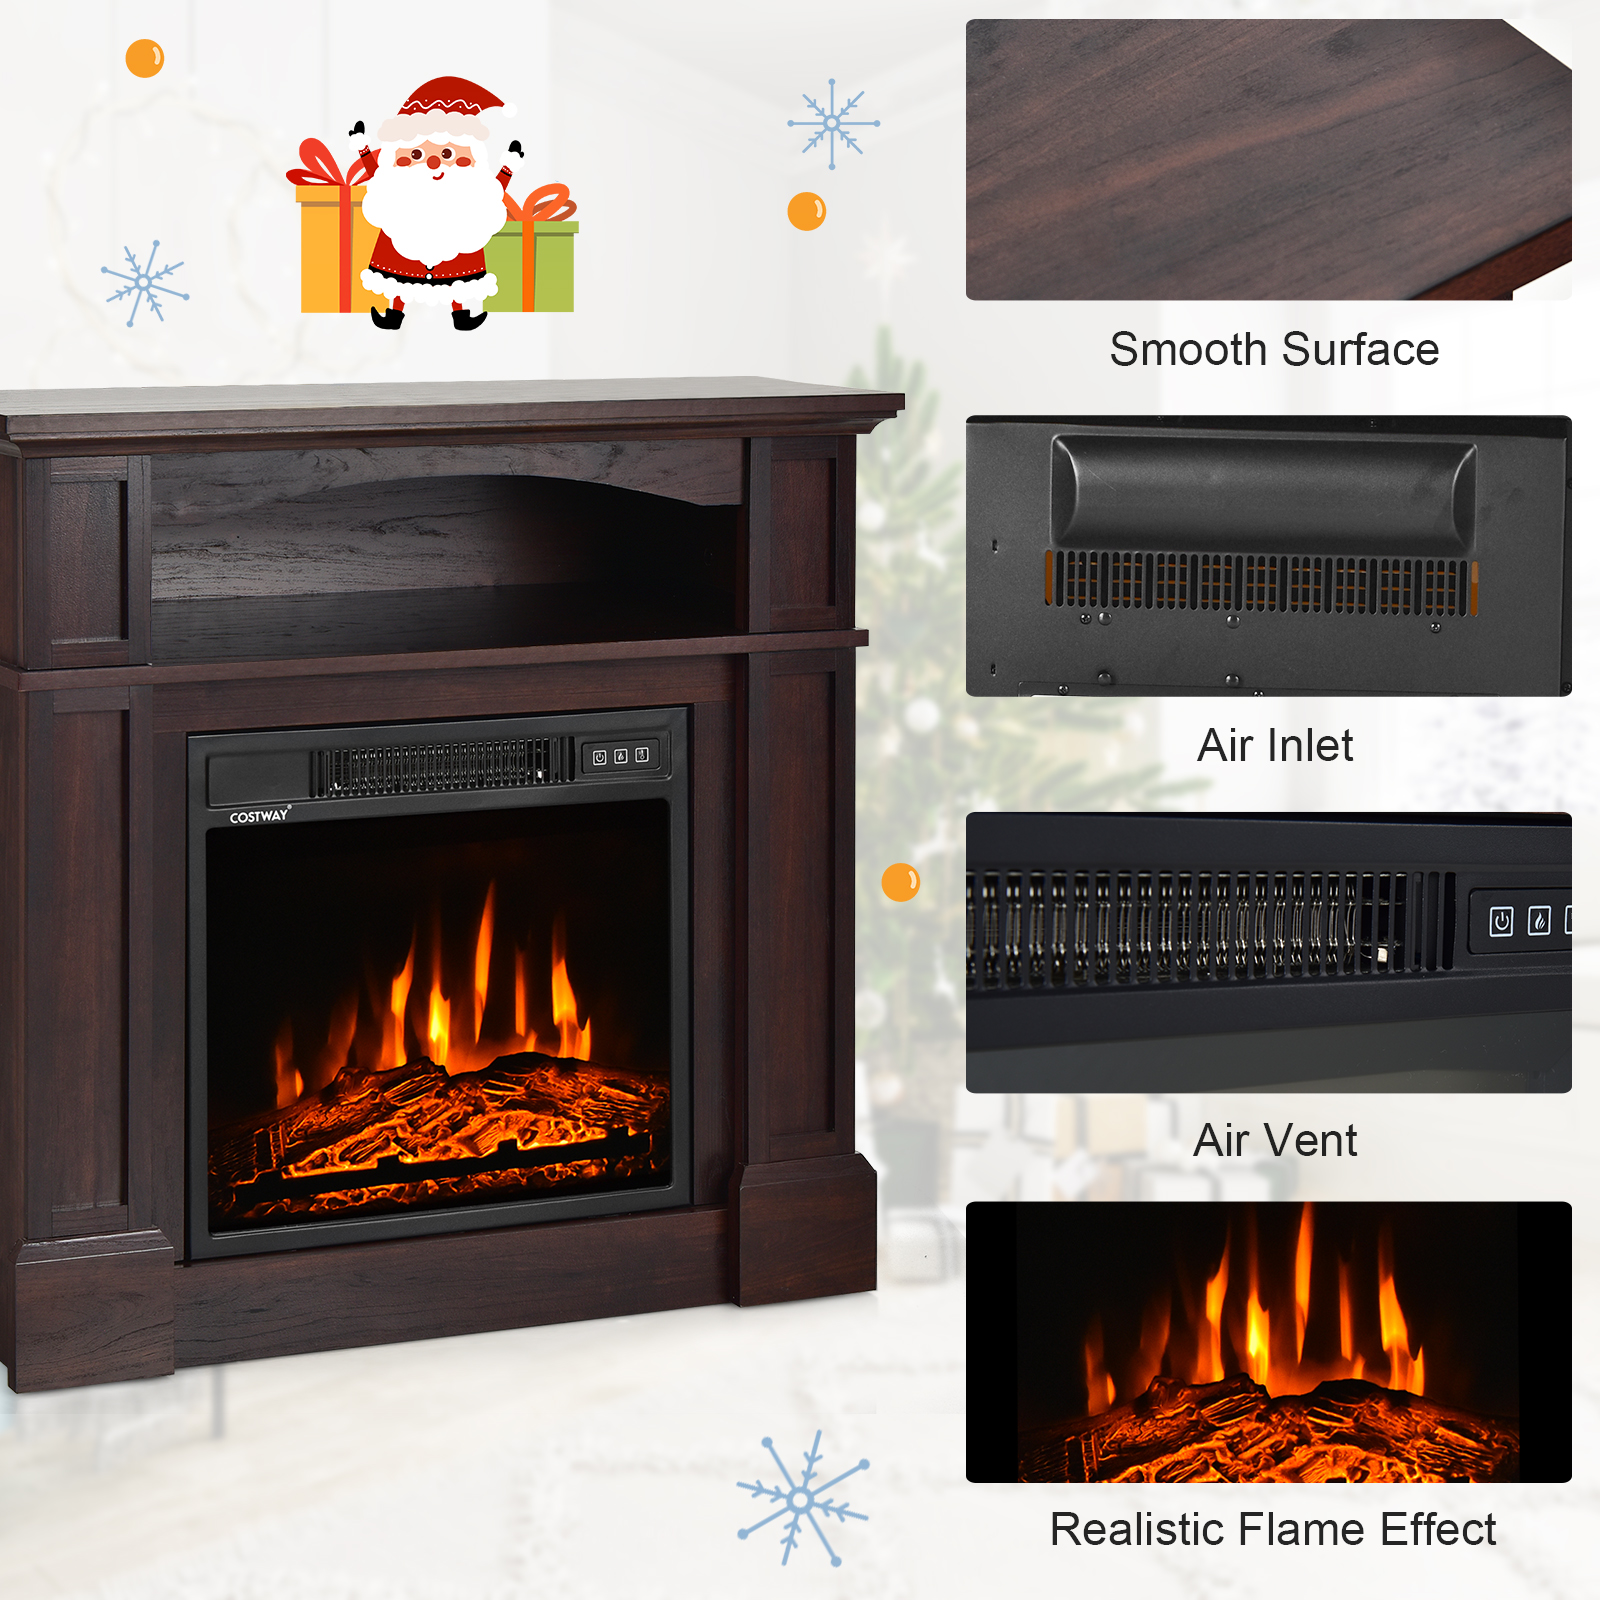 Topbuy 32" Electric Fireplace with Mantel 1400W Freestanding Heater with Remote Control & Adjustable Brightness Brown